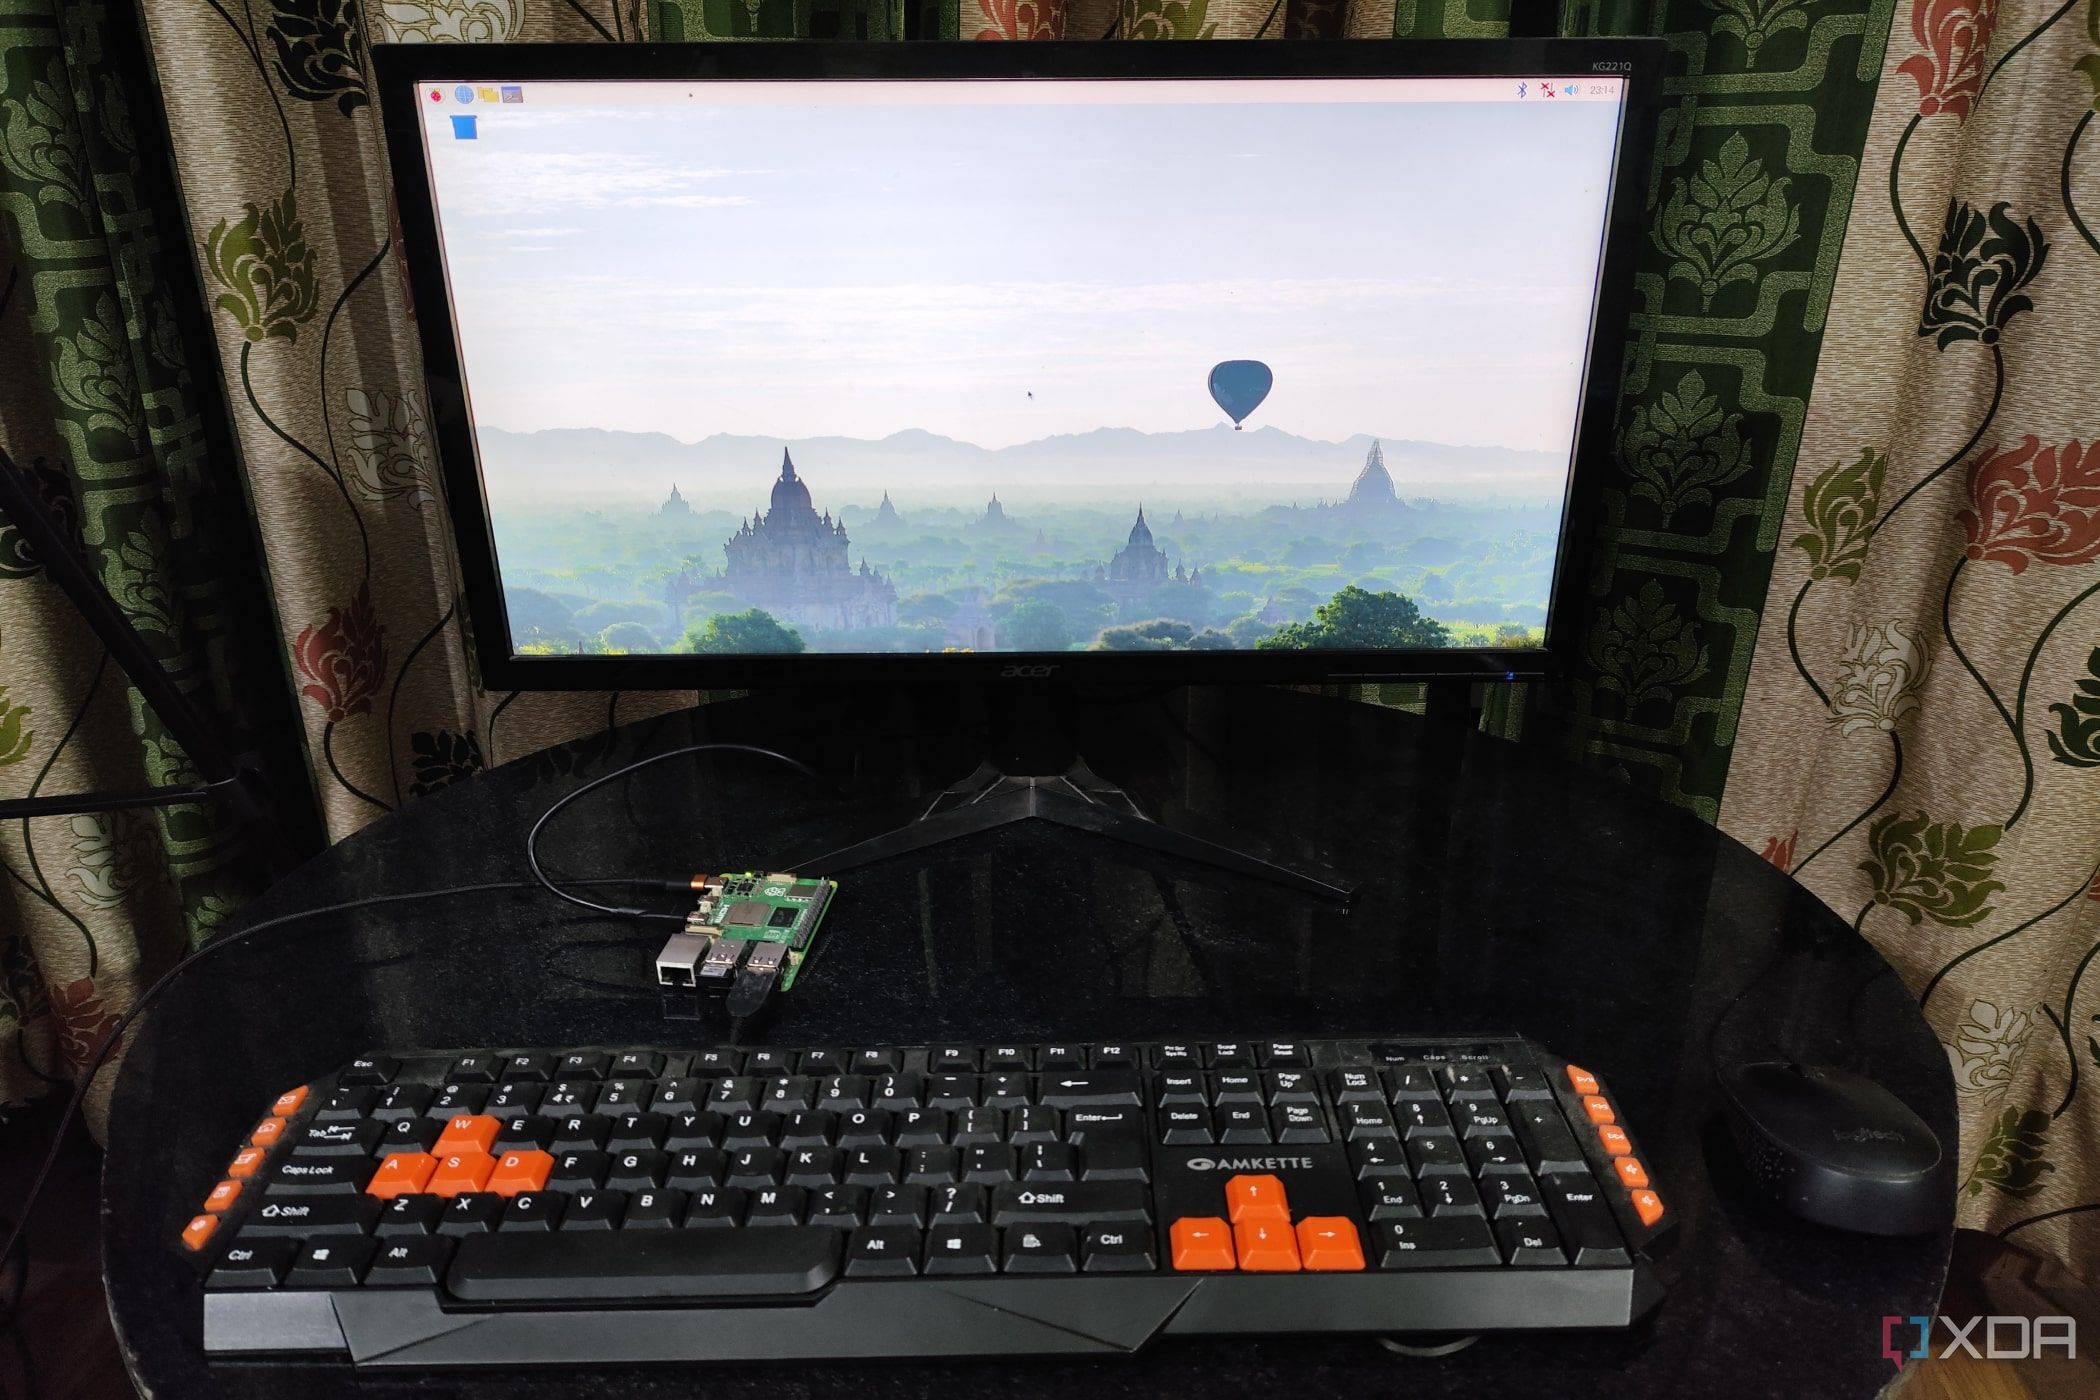 A Raspberry Pi 5 with a keyboard and mouse plugged in, the monitor displaying the Raspberry Pi operating system desktop